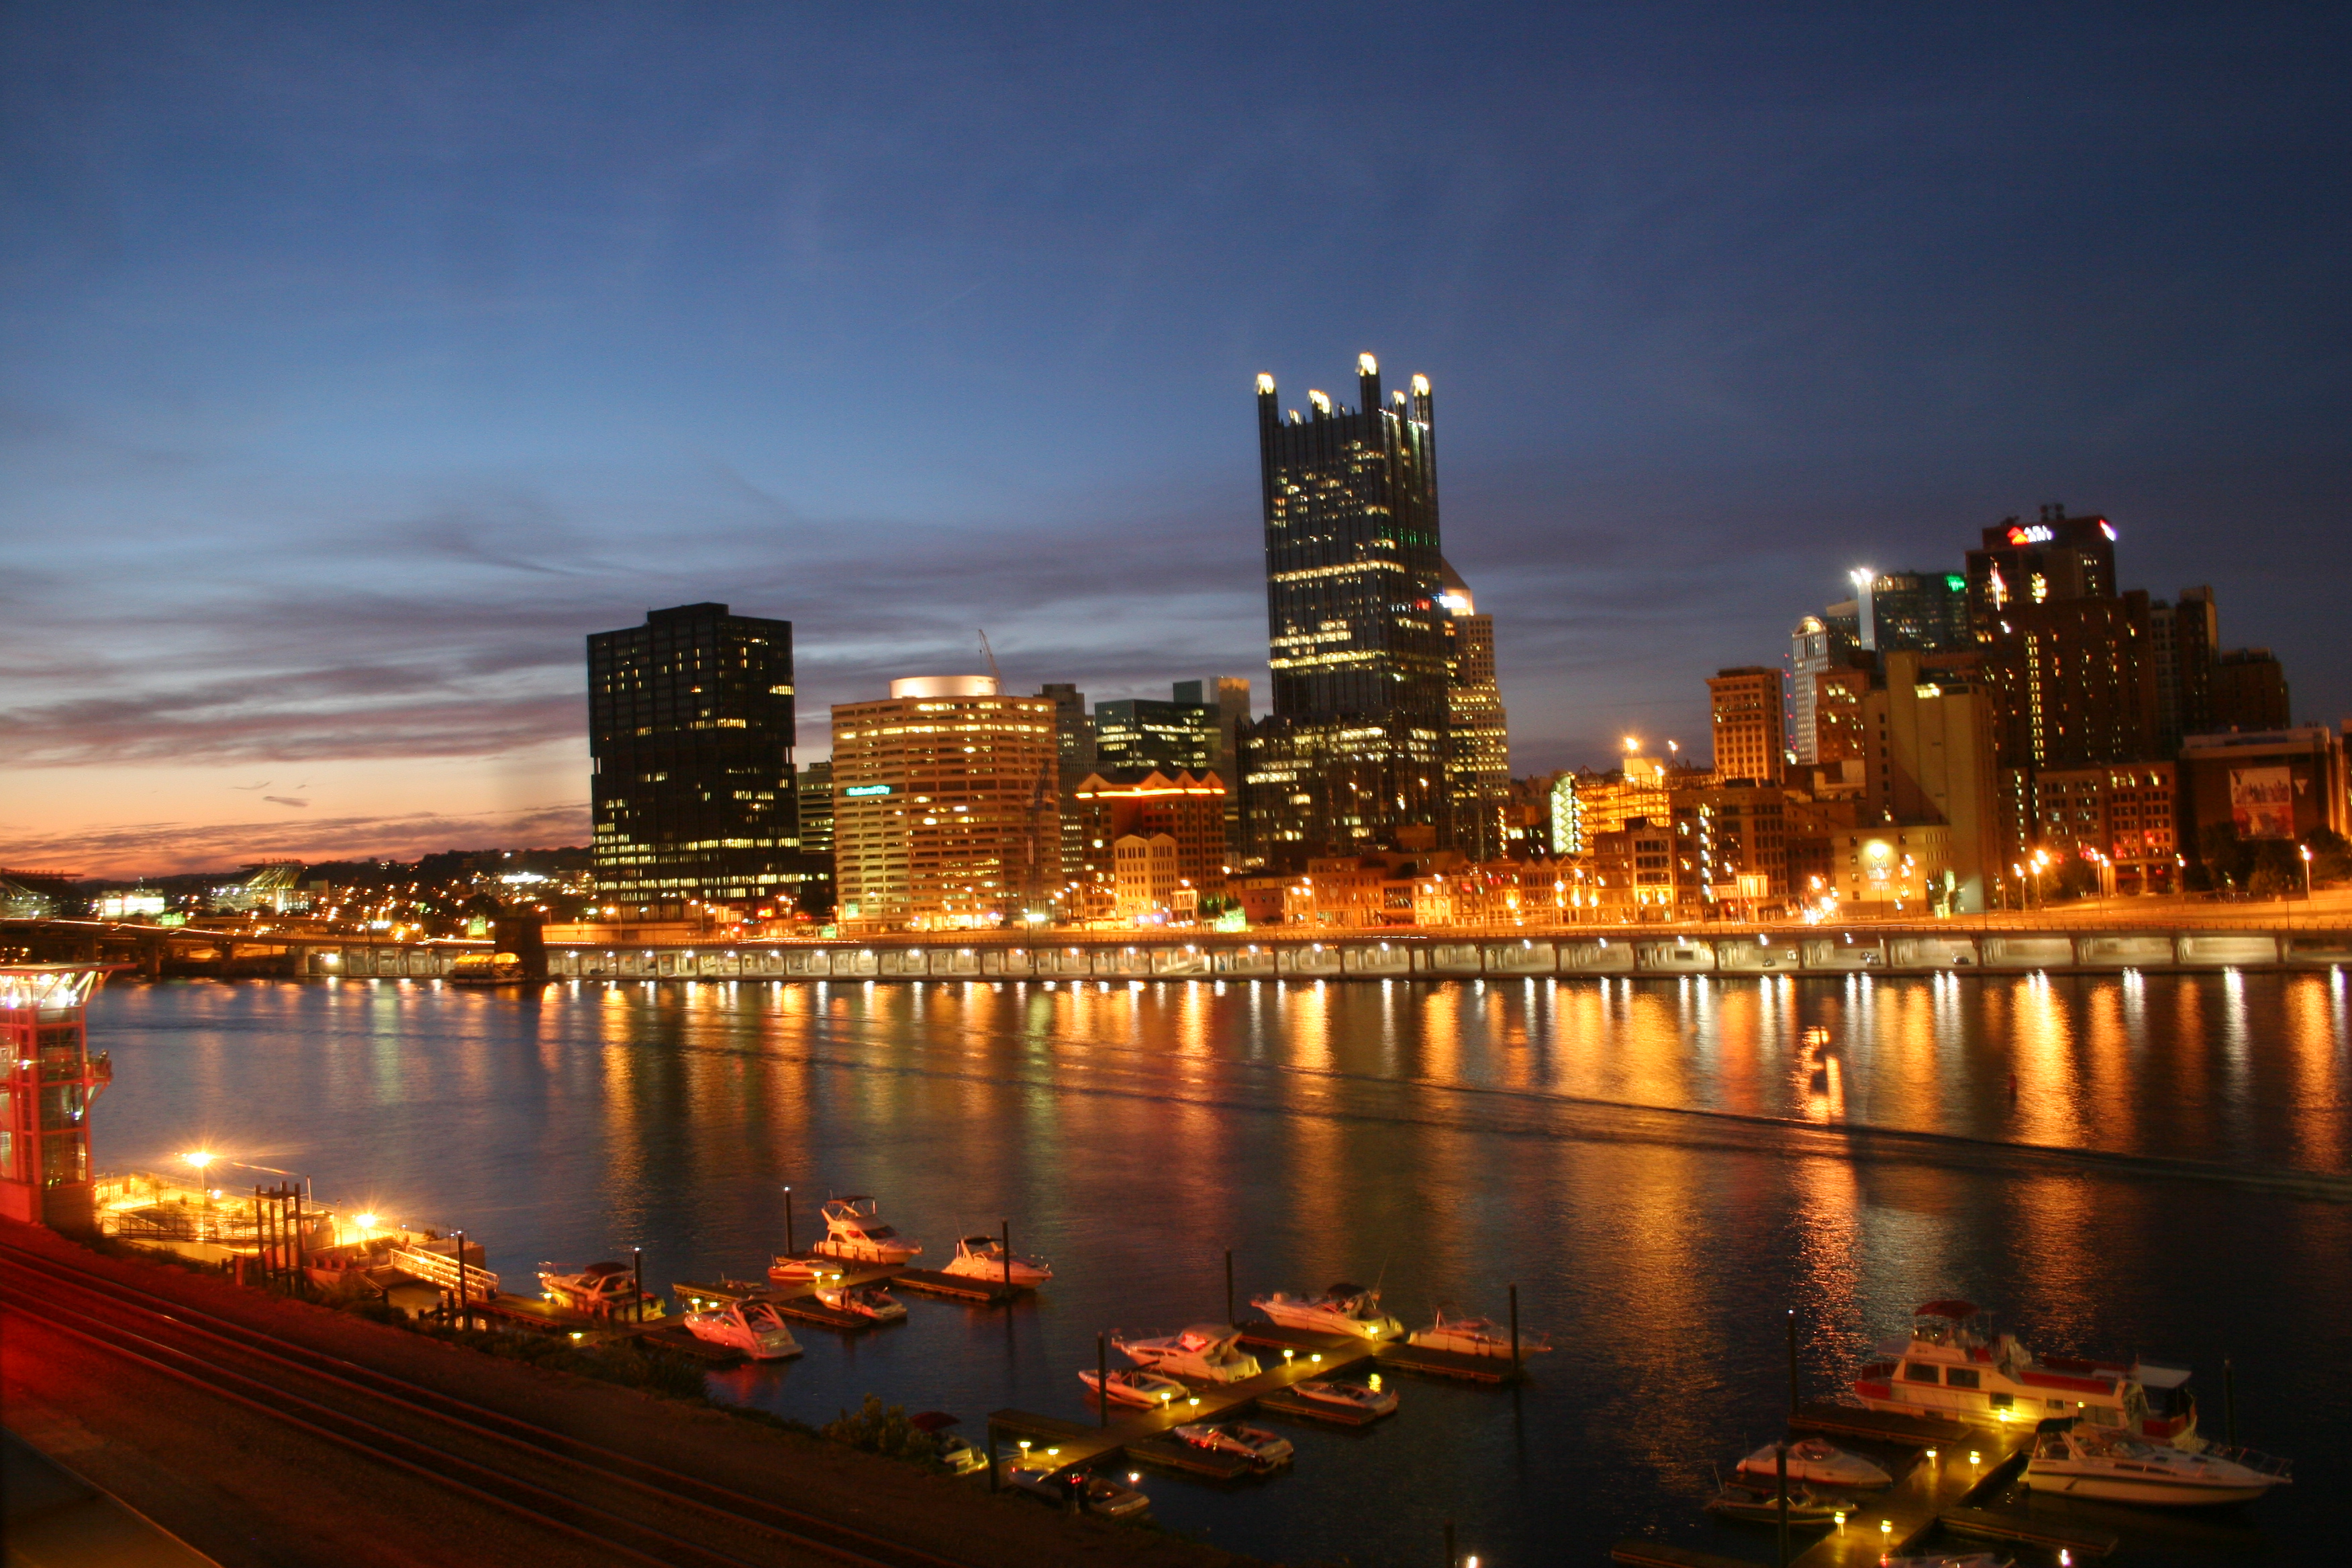 pittsburgh wallpapers hd 16285 images pittsburgh wallpapers hd 16285 3504x2336